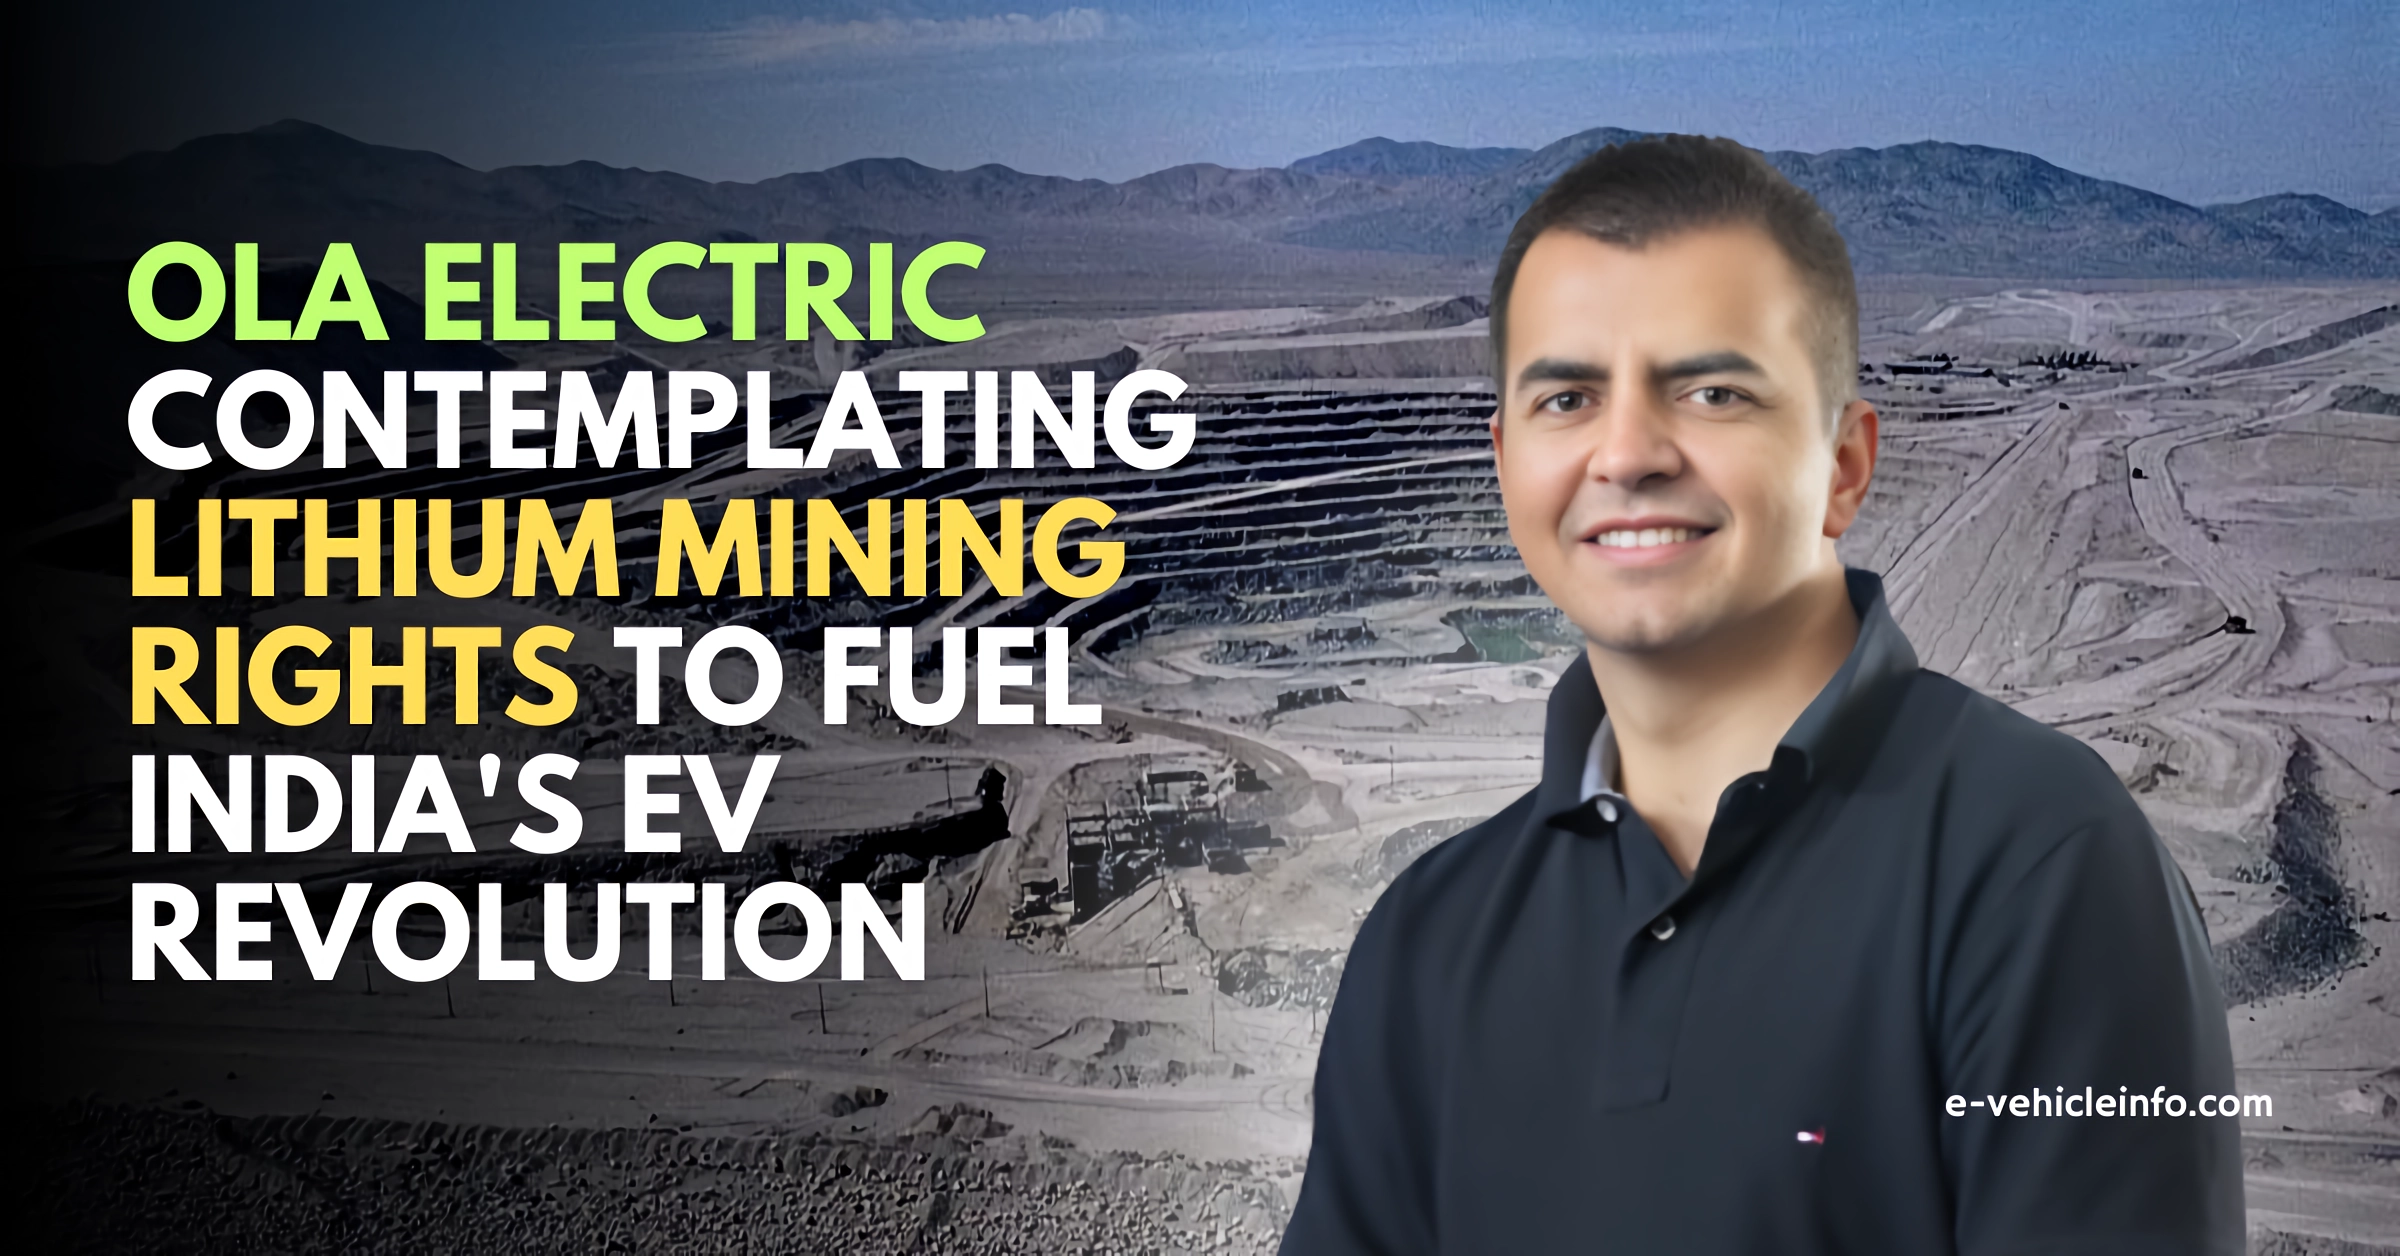 https://e-vehicleinfo.com/ola-electric-contemplating-lithium-mining-rights-to-fuel-indias-ev-revolution/